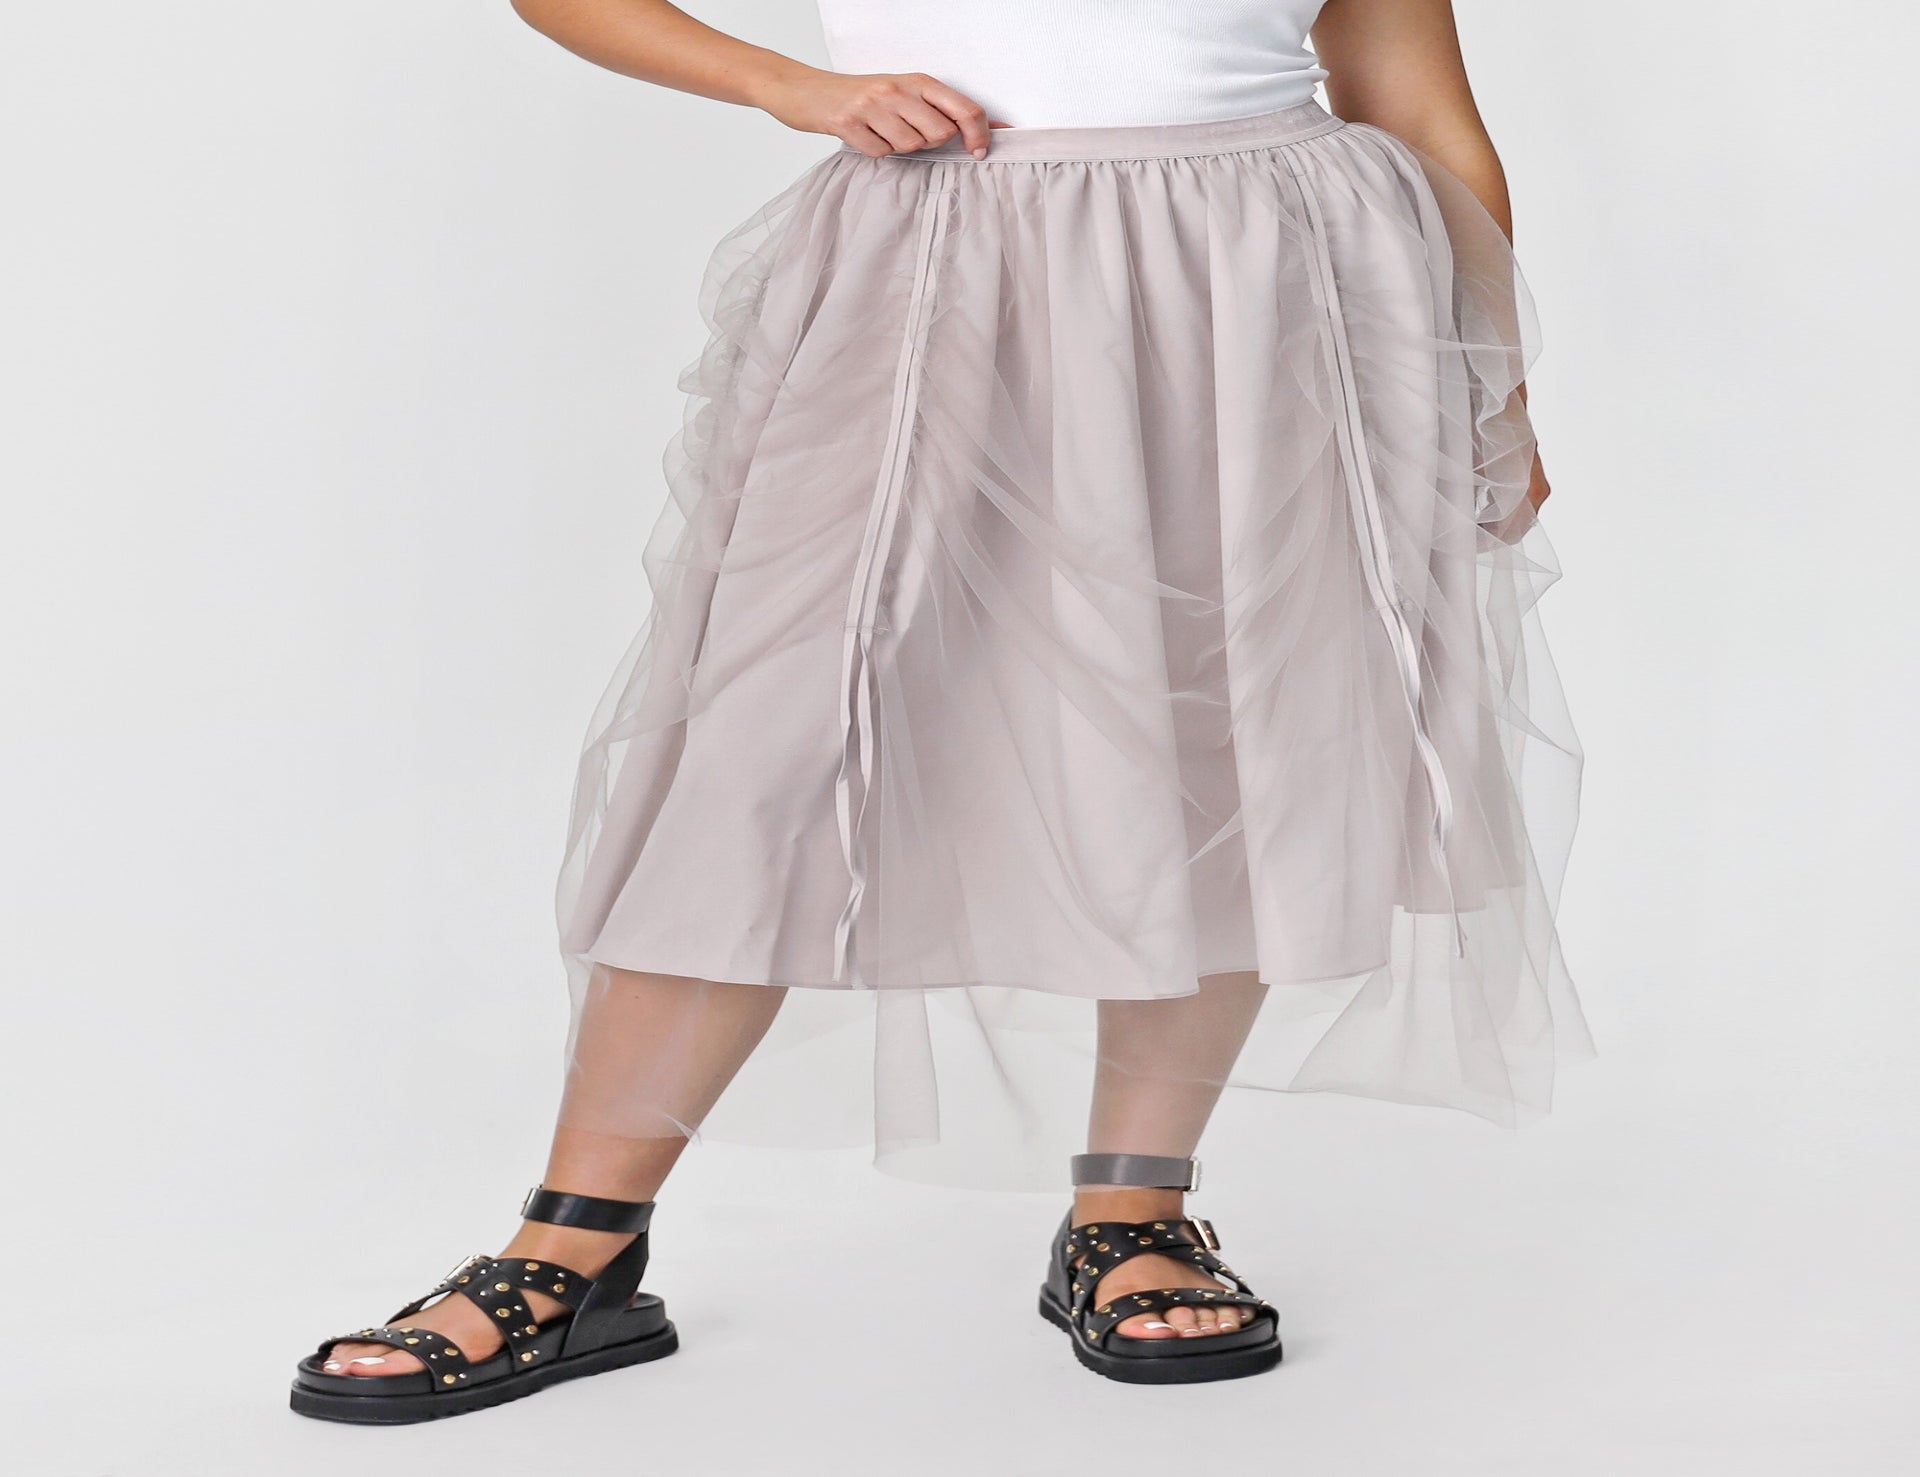 Ruched Mesh Skirt - Pink - Skirts - Long - Women's Clothing - Storm